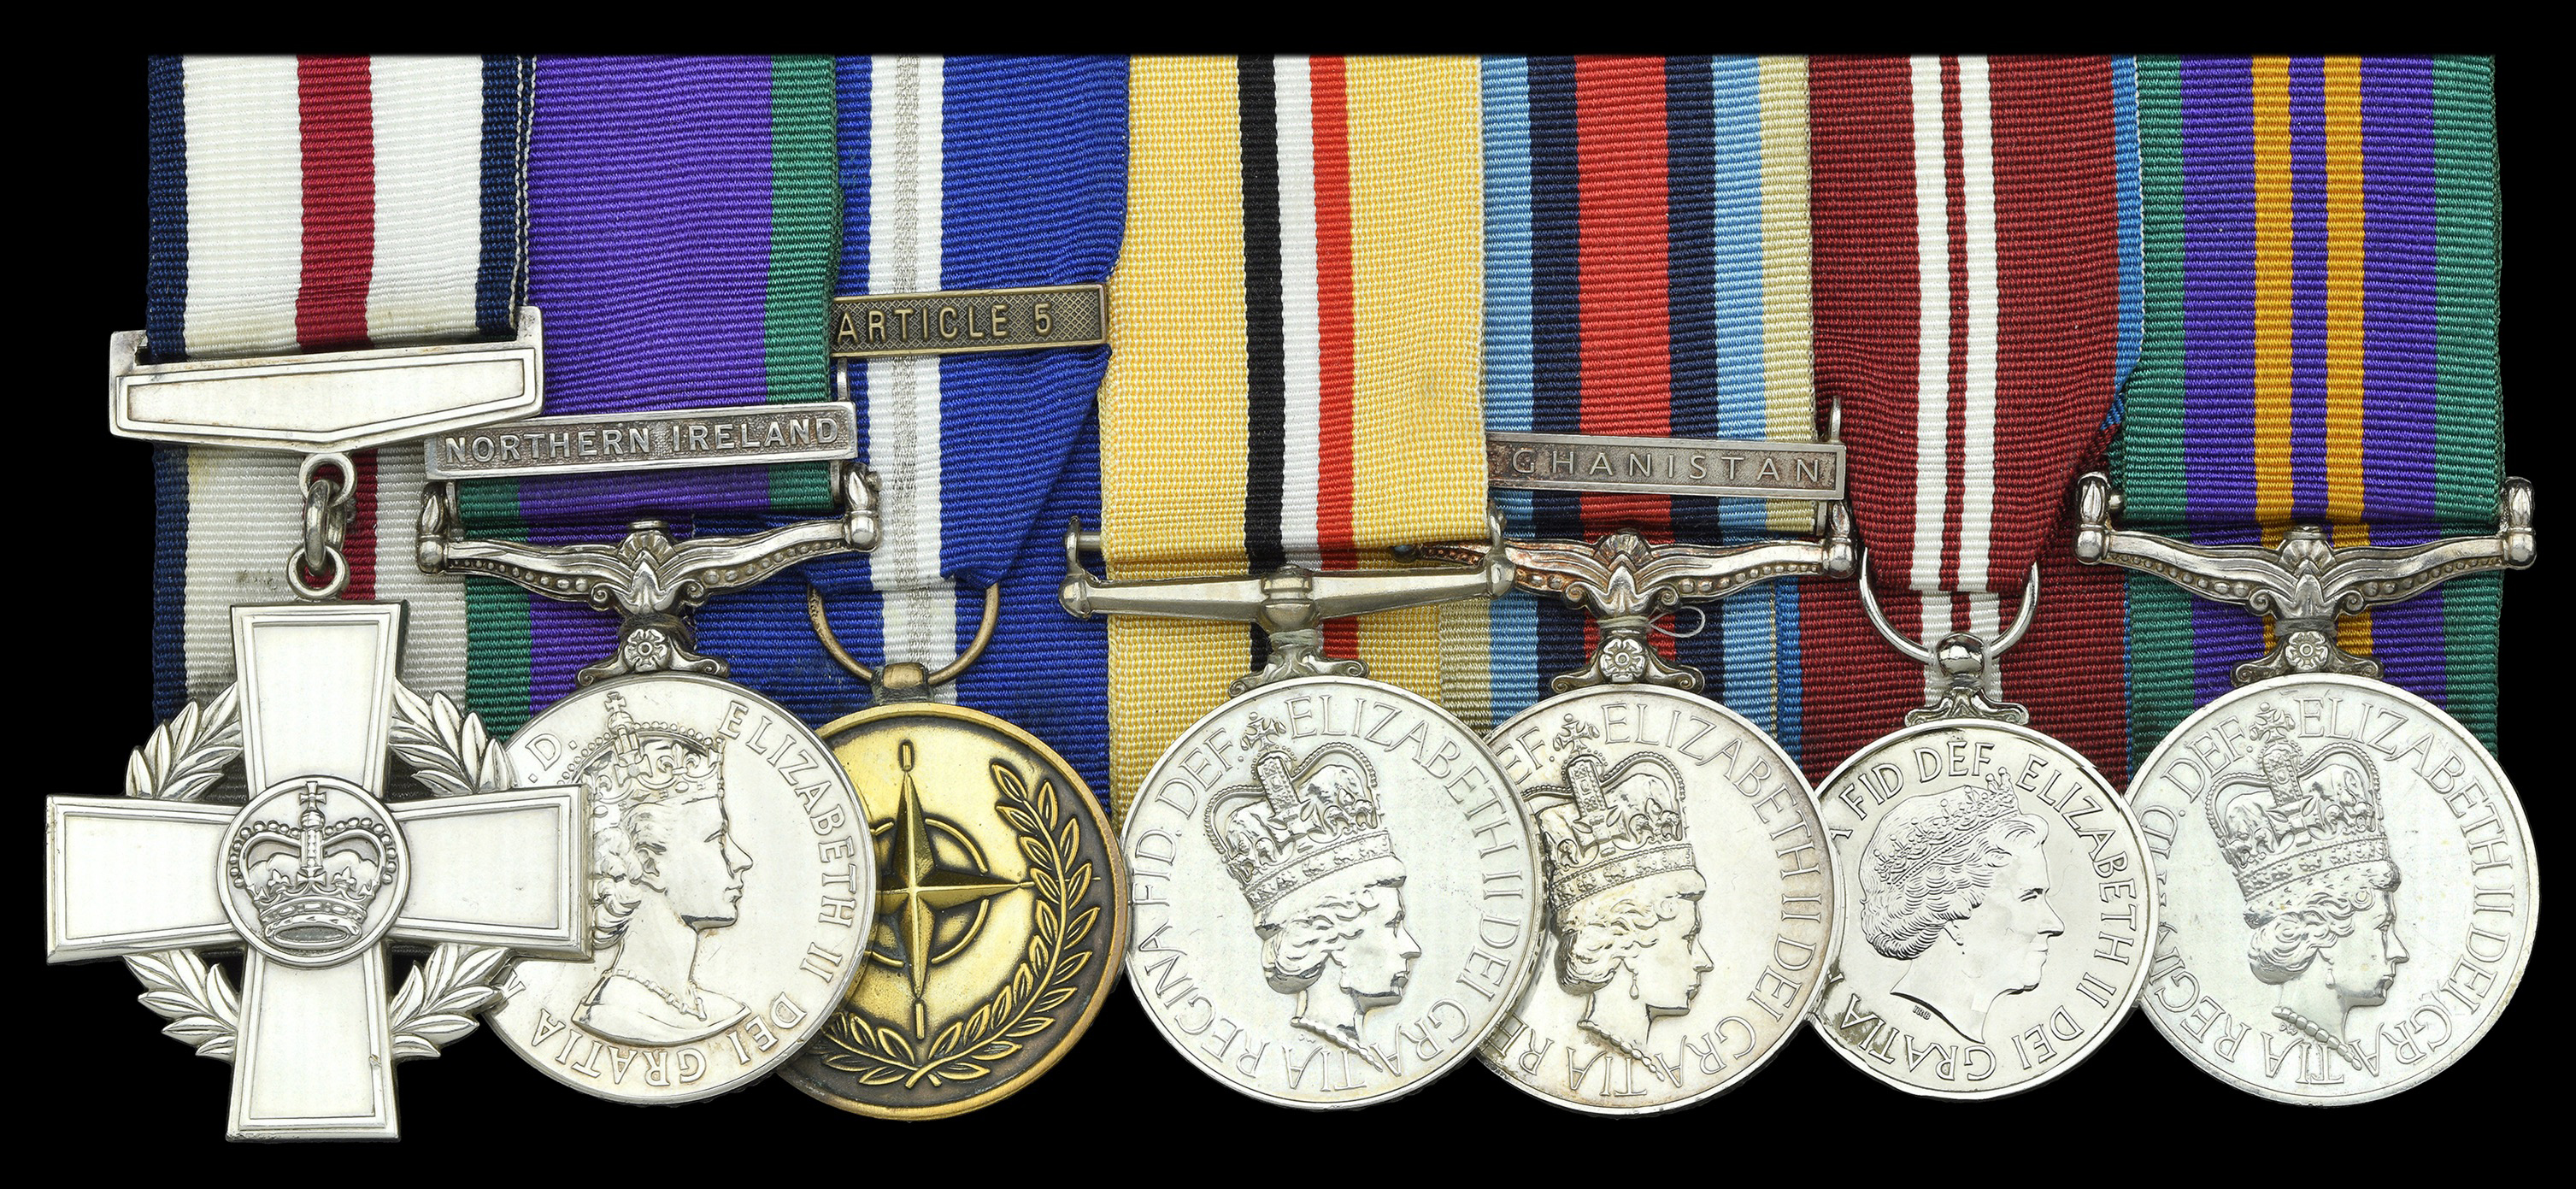 Among the medals being sold are a General Service Medal, the Operational Service Medal for Afghanistan and the Jubilee Medal (Credit Dix Noonan Webb/PA)